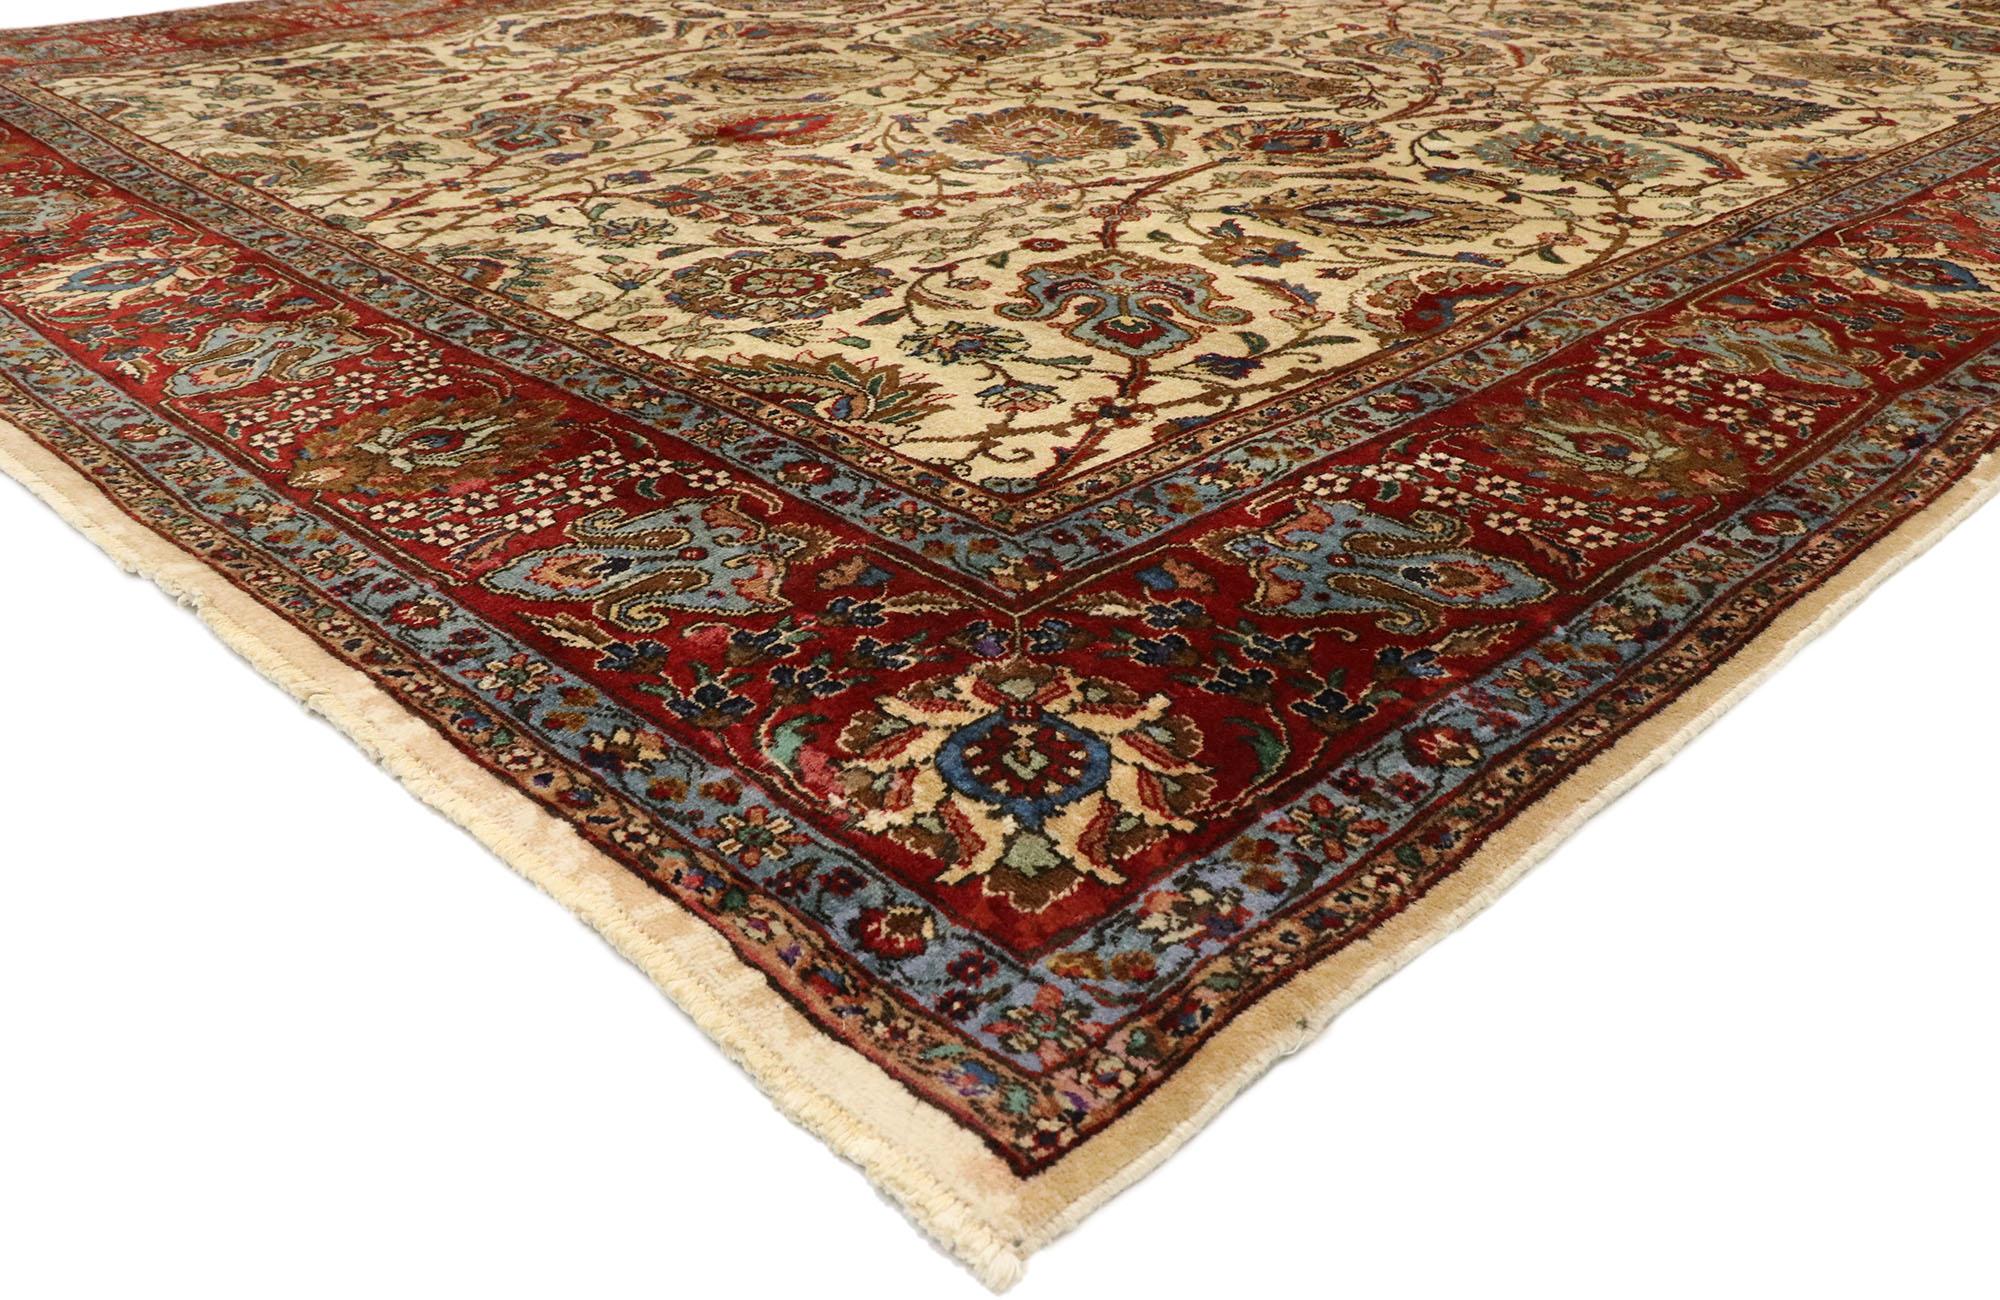 76409, vintage Persian Tabriz Palace rug with Federal American Colonial style. With timeless appeal, refined colors, and architectural design elements, this hand knotted wool vintage Persian Tabriz palace rug can beautifully blend modern,